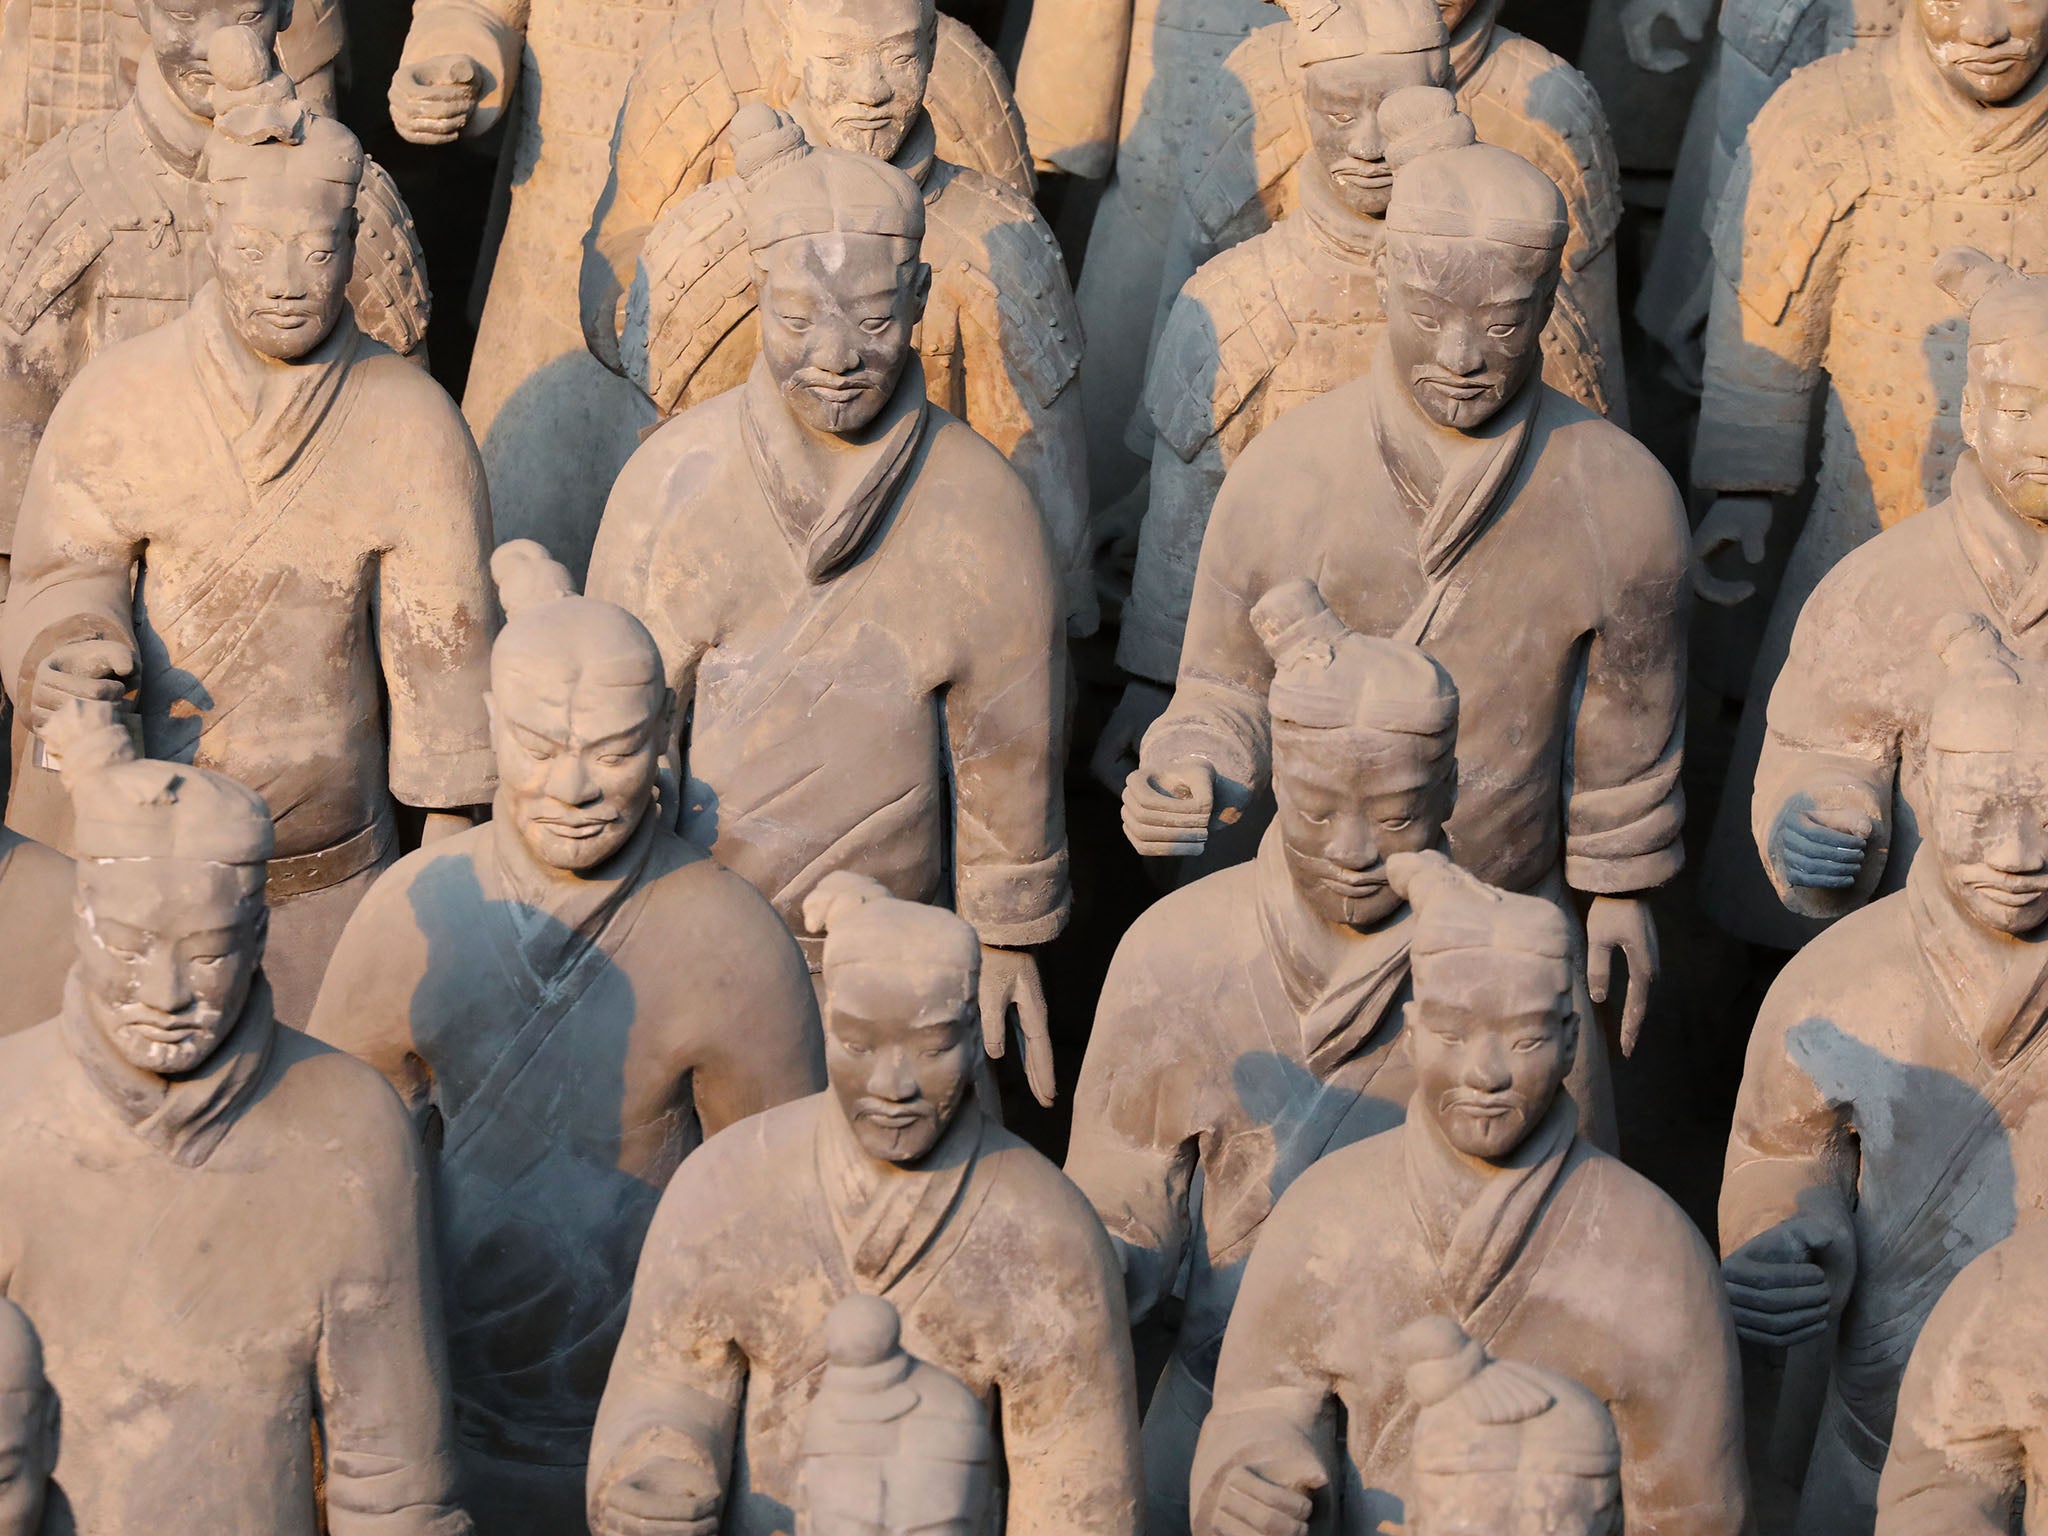 China’s terracotta warriors were discovered in 1974 – and it’s never been easier to see them